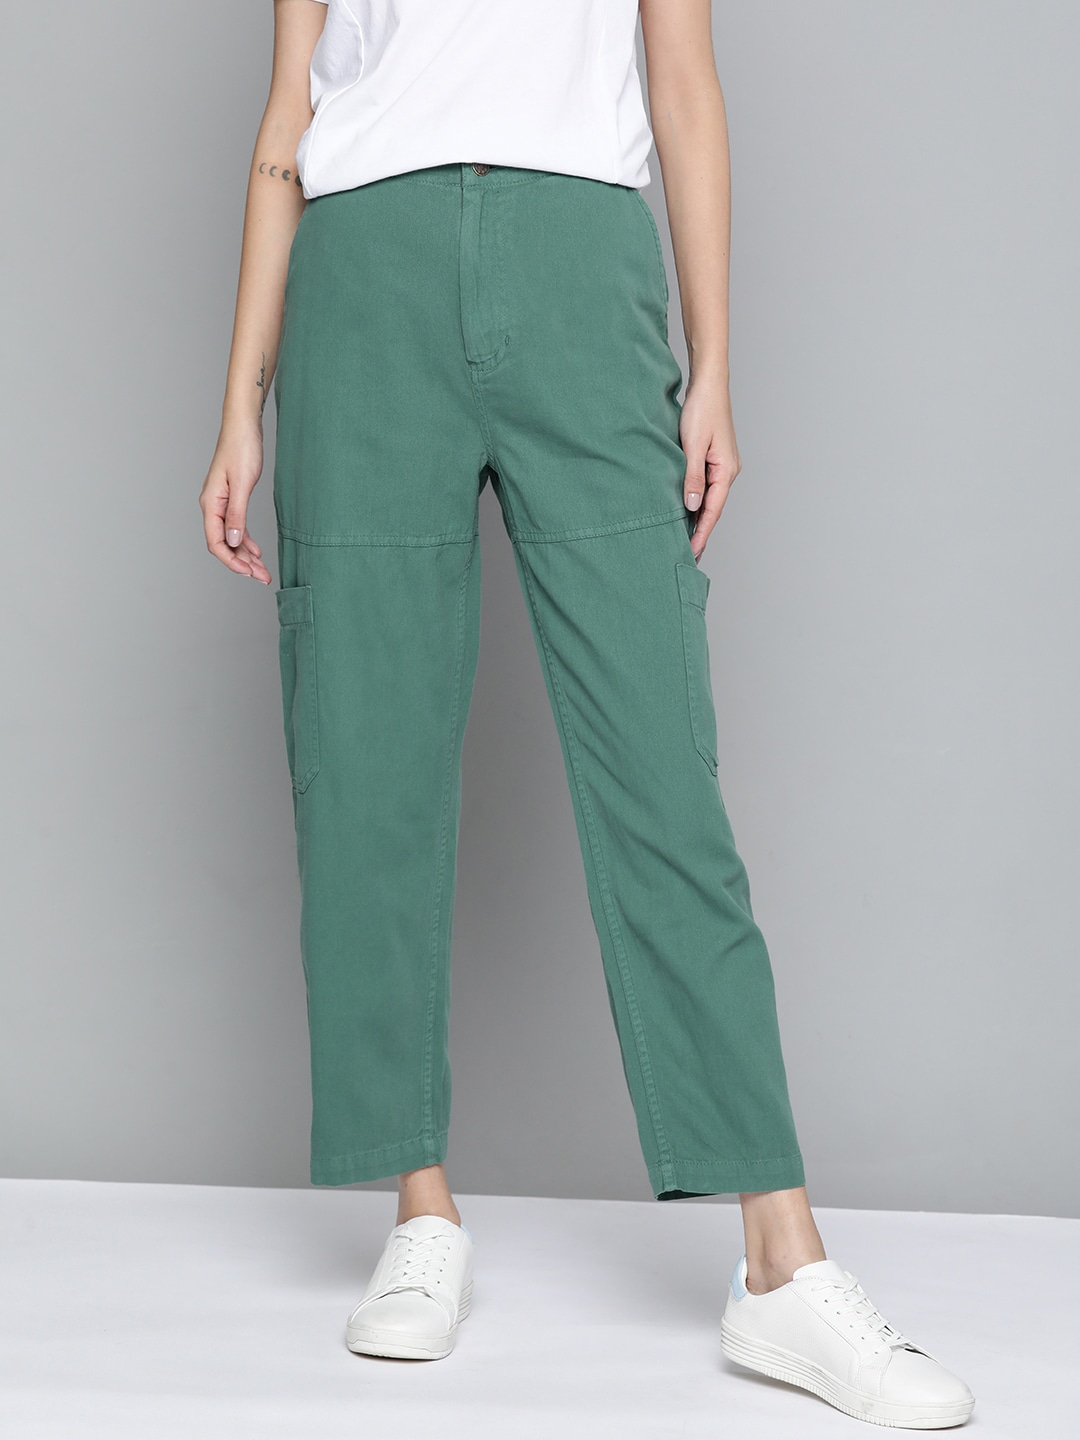 Mast & Harbour Women Sage Green Solid Chinos Trousers Price in India